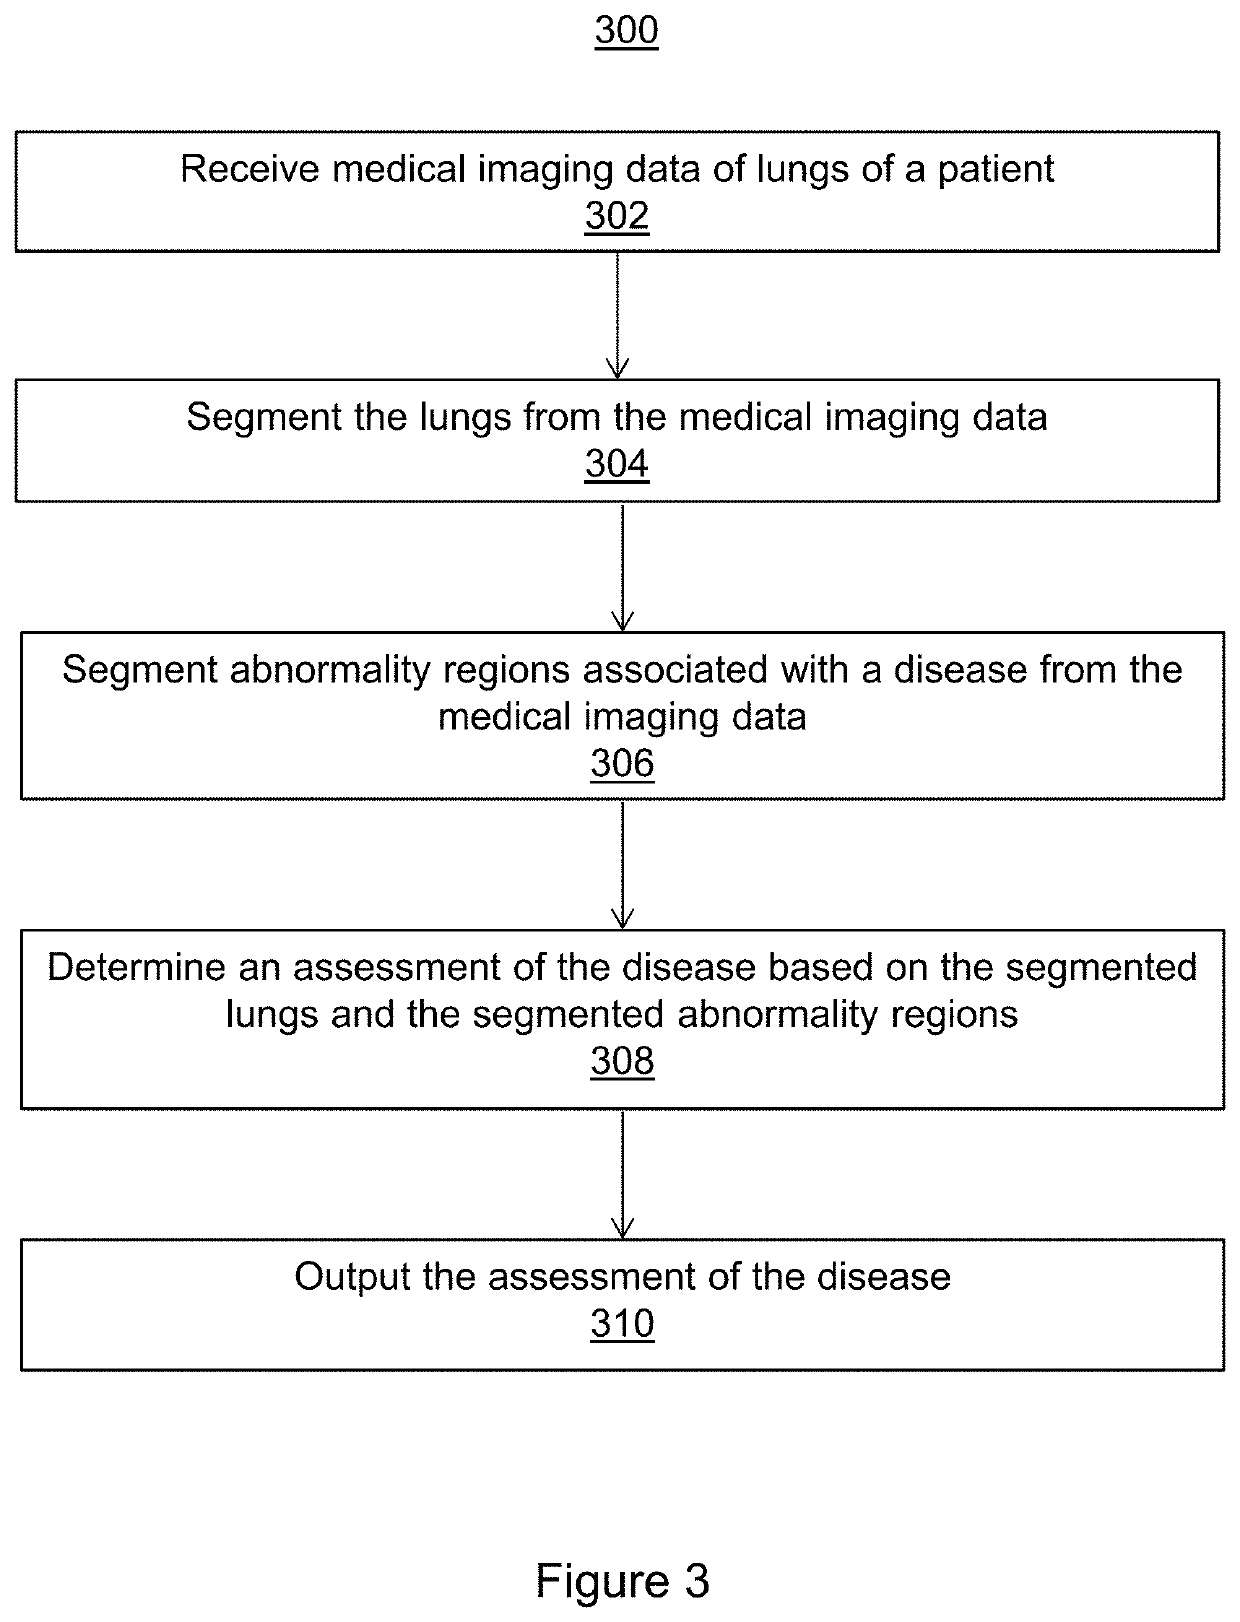 Assessment of Abnormality Regions Associated with a Disease from Chest CT Images